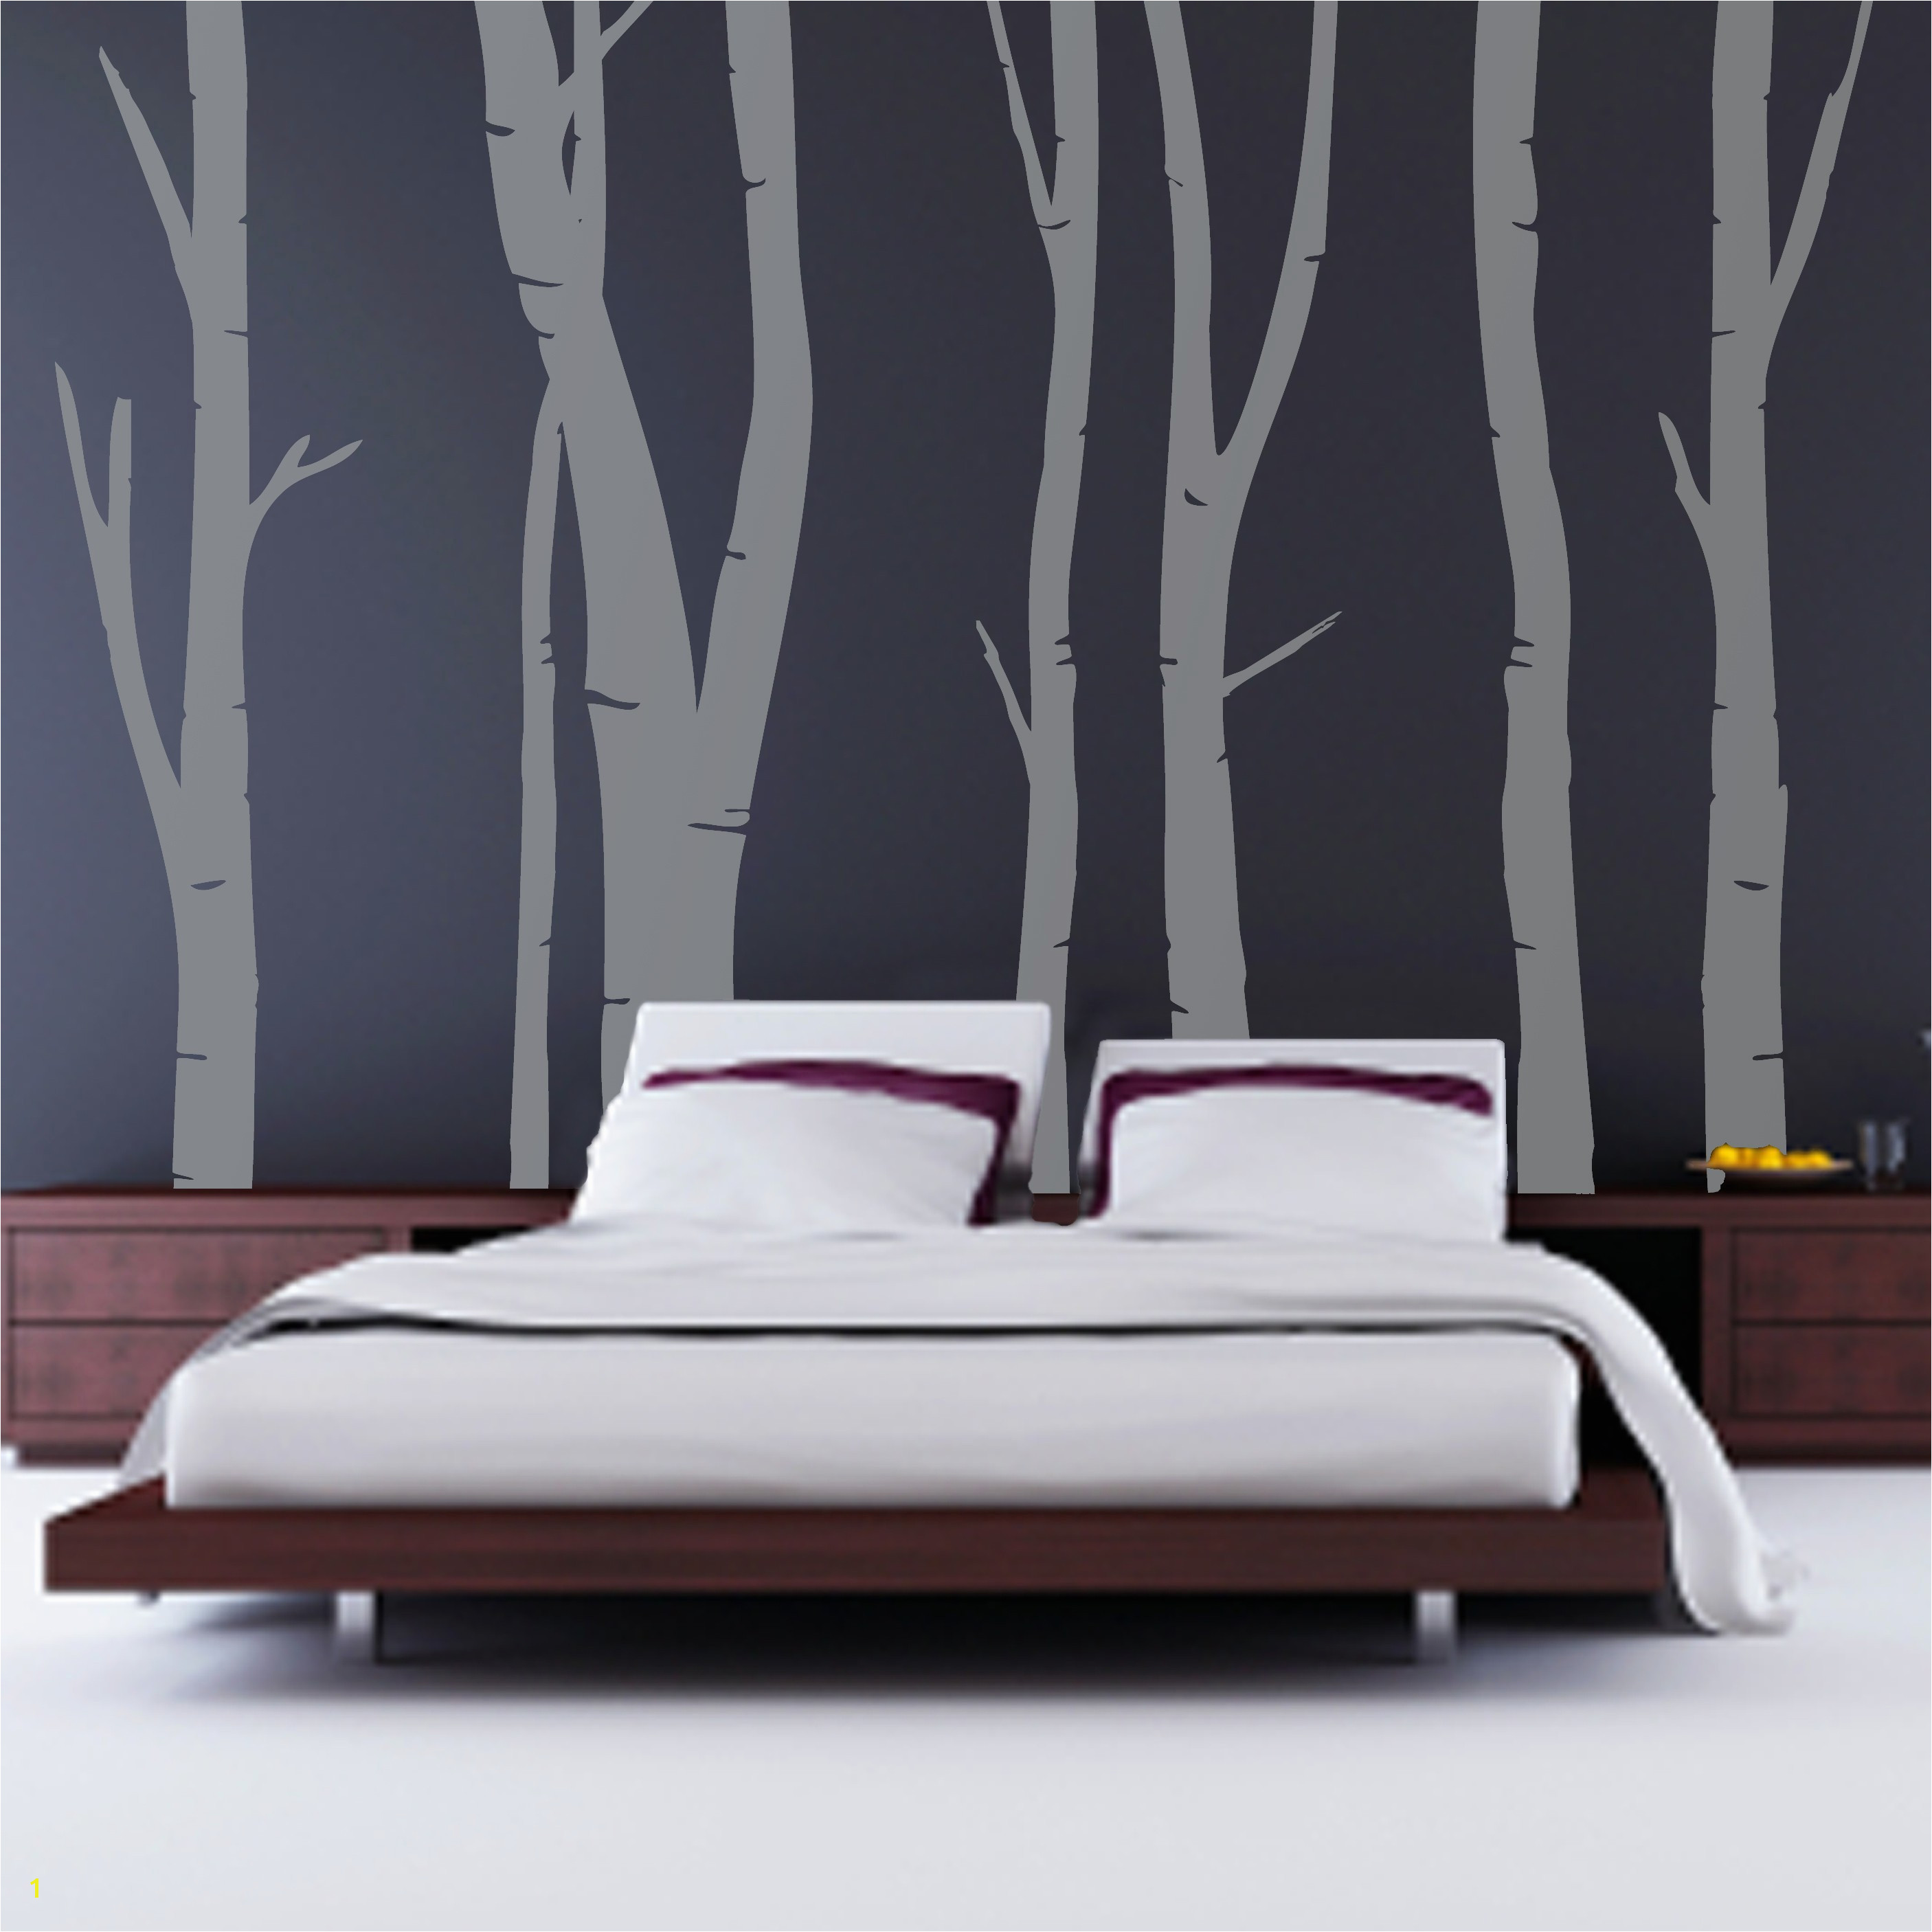 Wall Murals On Sale Wall Decals for Bedroom Unique 1 Kirkland Wall Decor Home Design 0d